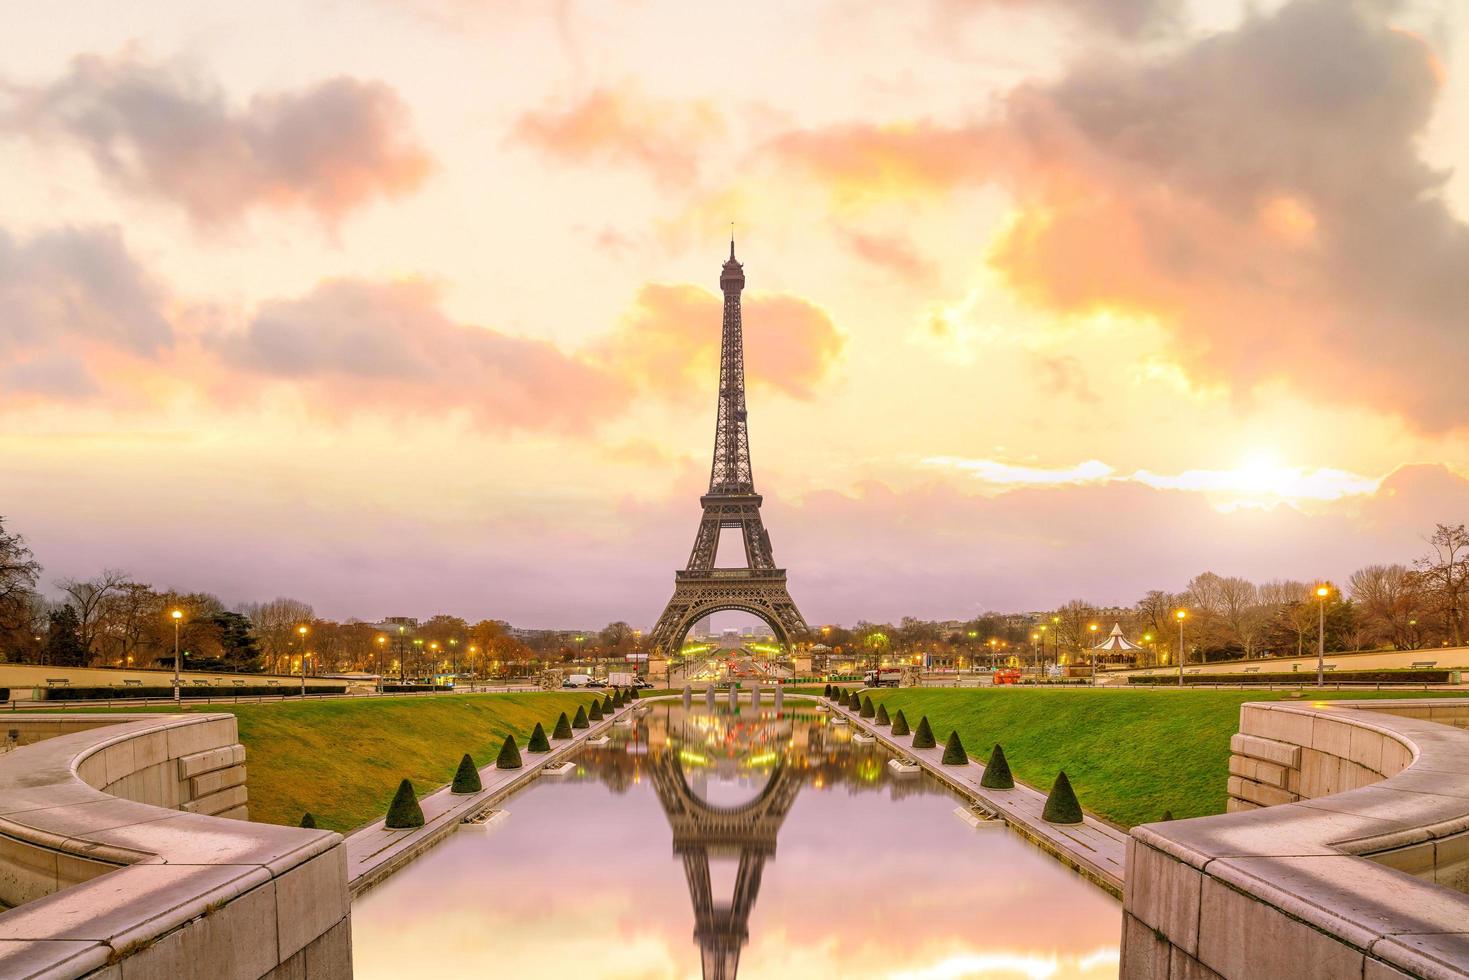 Eiffel Tower at sunrise from Trocadero Fountains in Paris photo